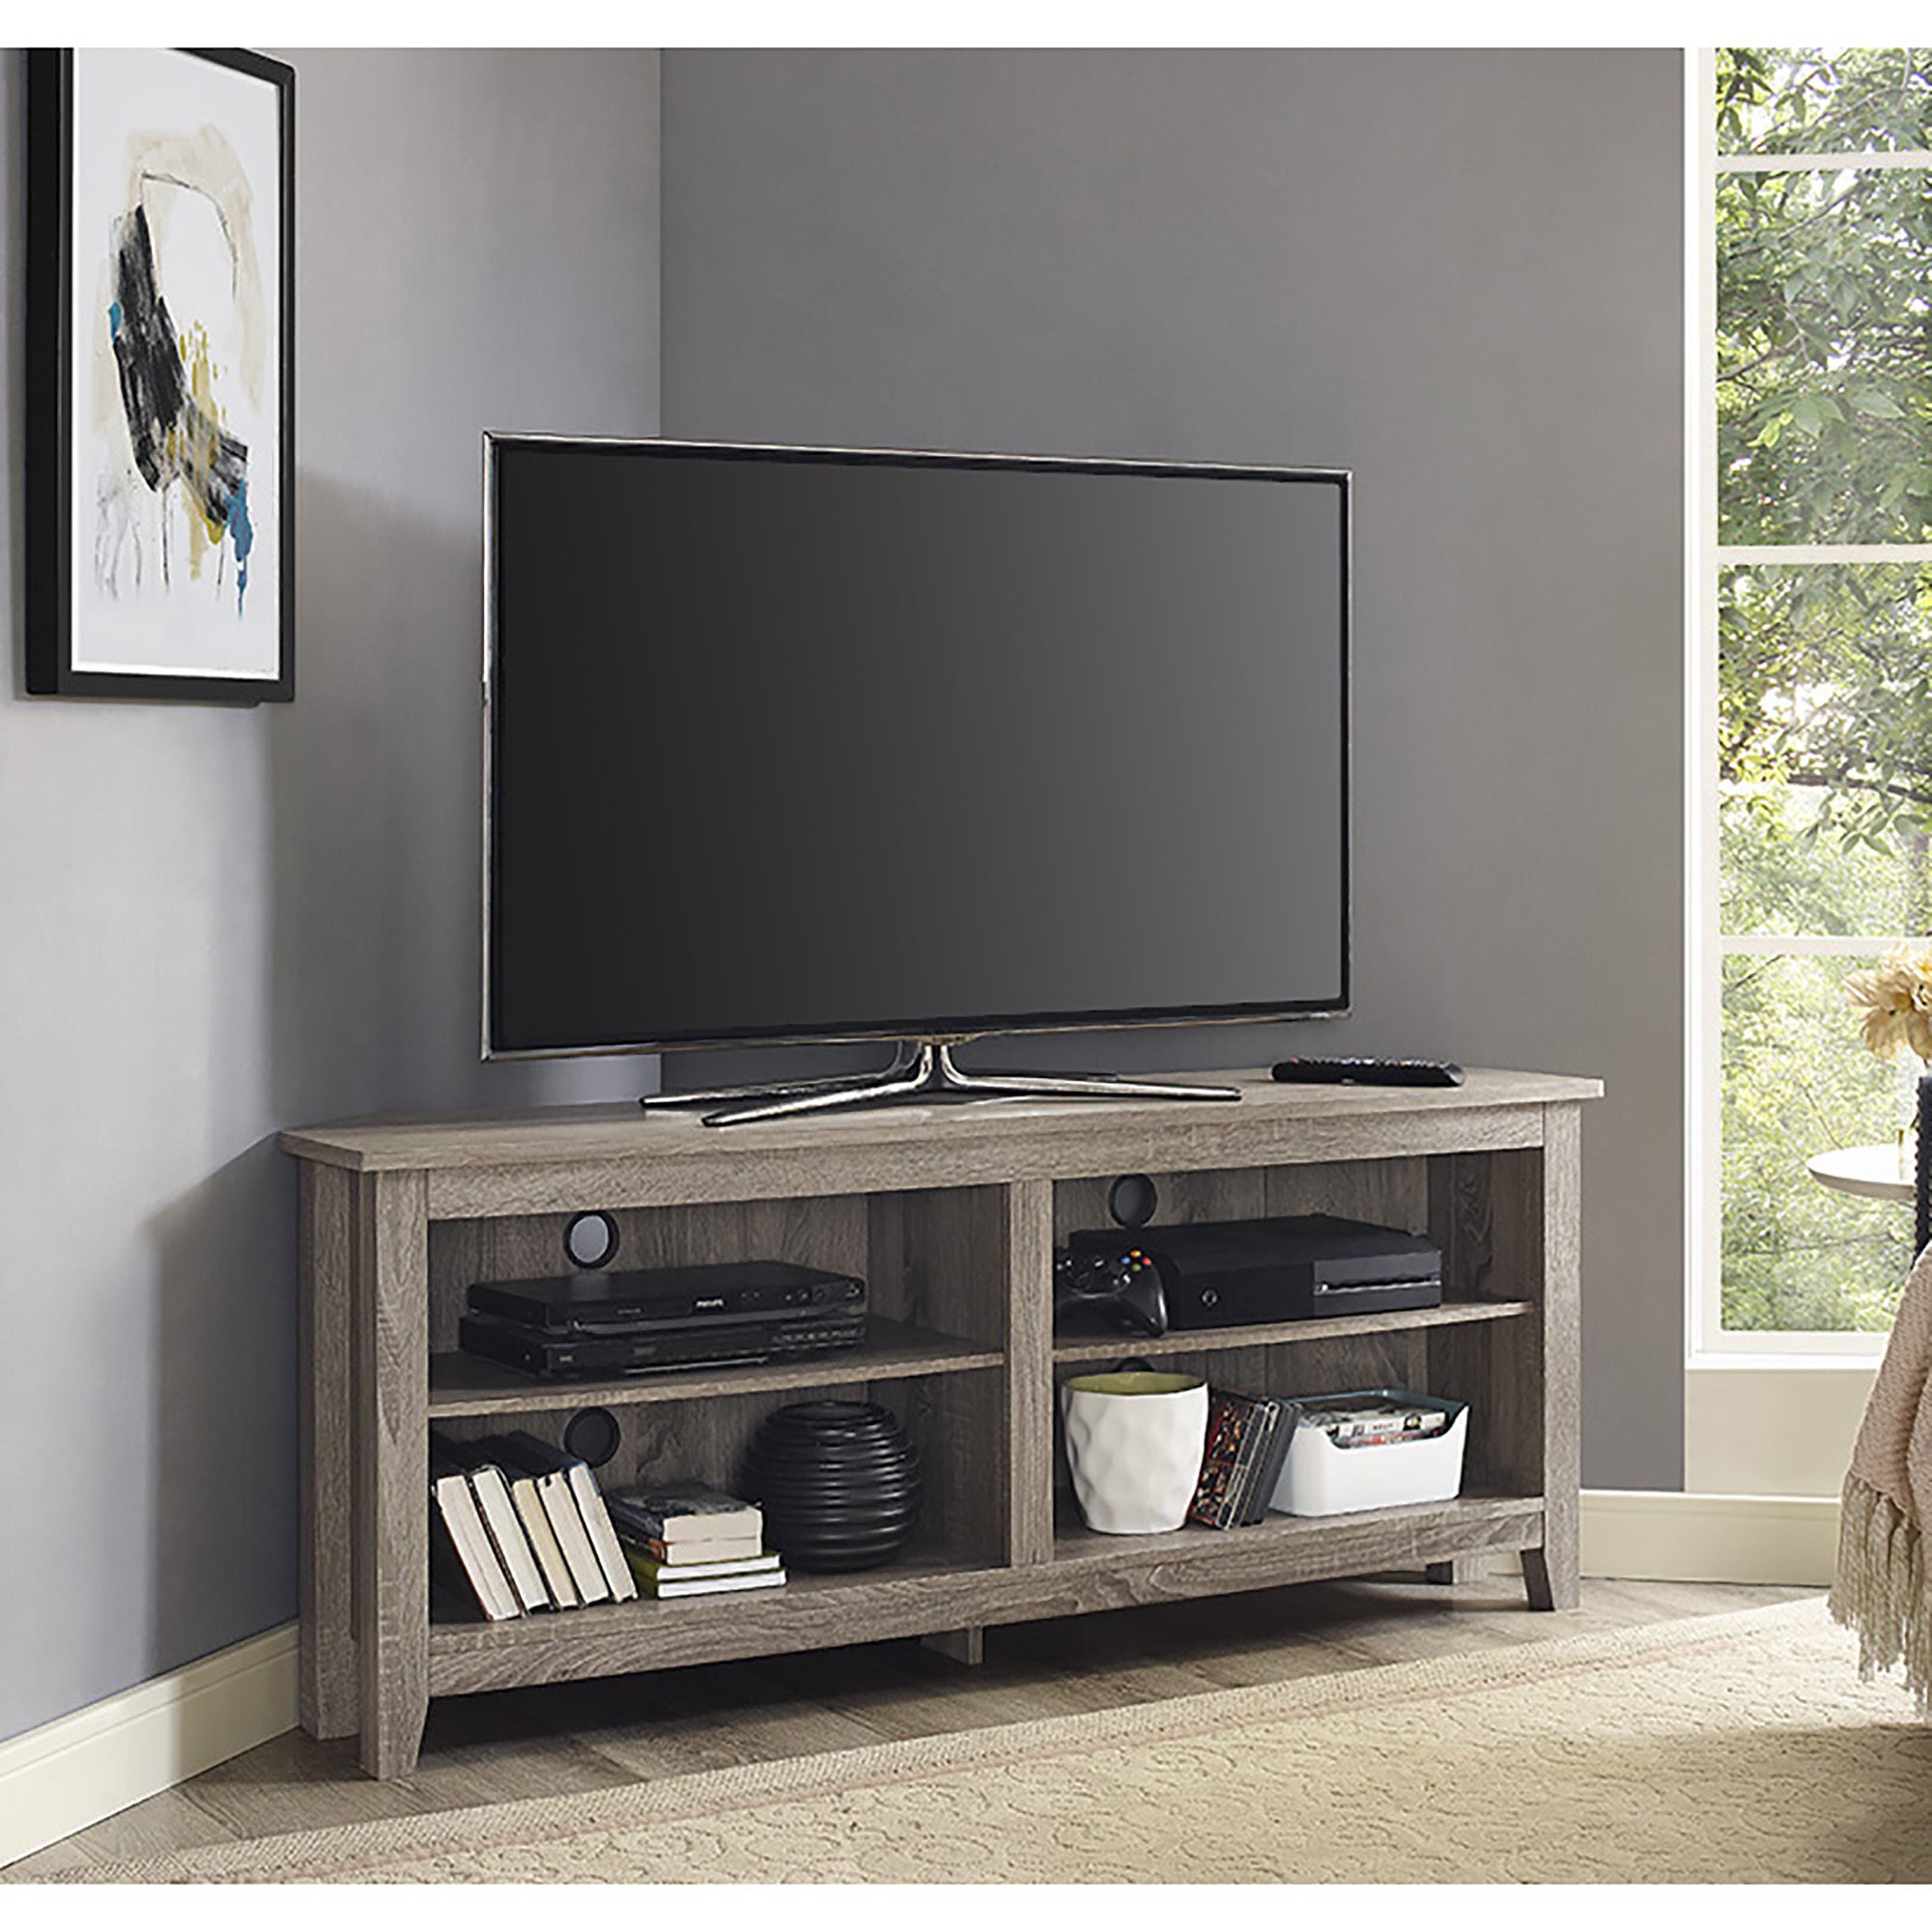 tv stand with mount for corner wooden 65 inch glass wood swivel